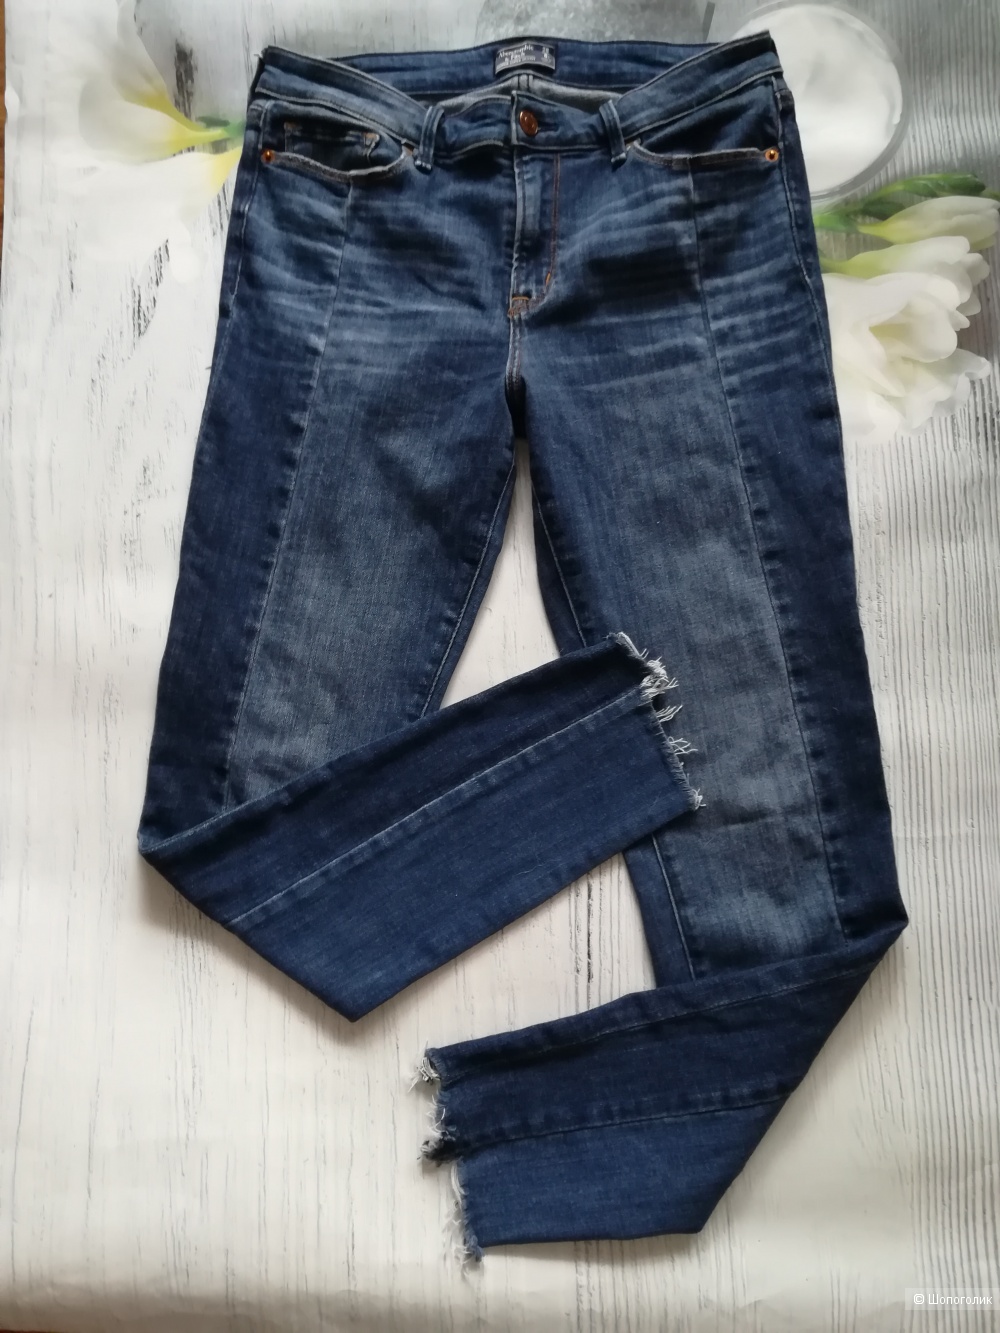 Джинсы Abercrombie and Fitch, 28